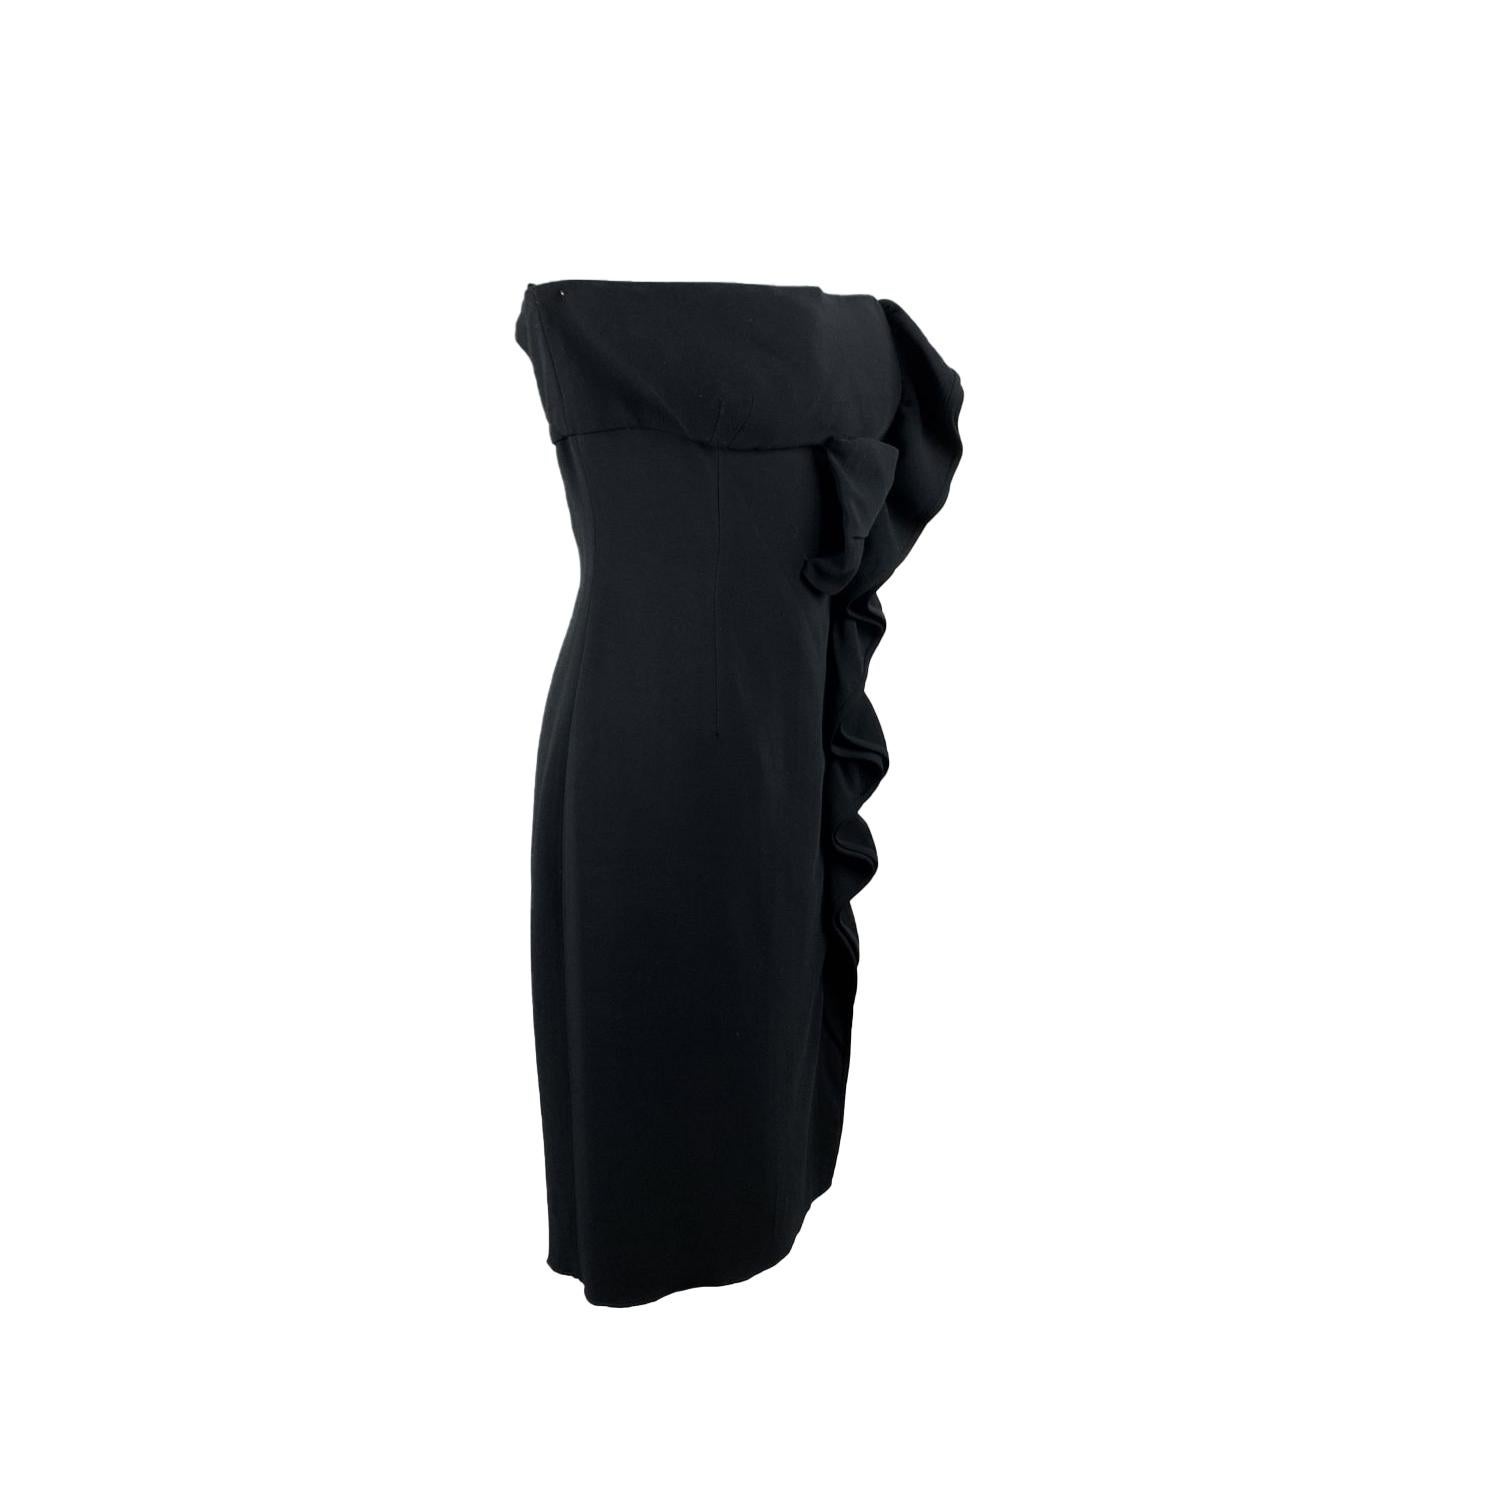 Valentino black bustier dress. Elegant strapless little black dress. Straight neckline. Side ruffles detailing. Side zip closure. Composition tag is missing; it is a very smooth fabric, it seems to be viscose. Size is not indicated; estimated size